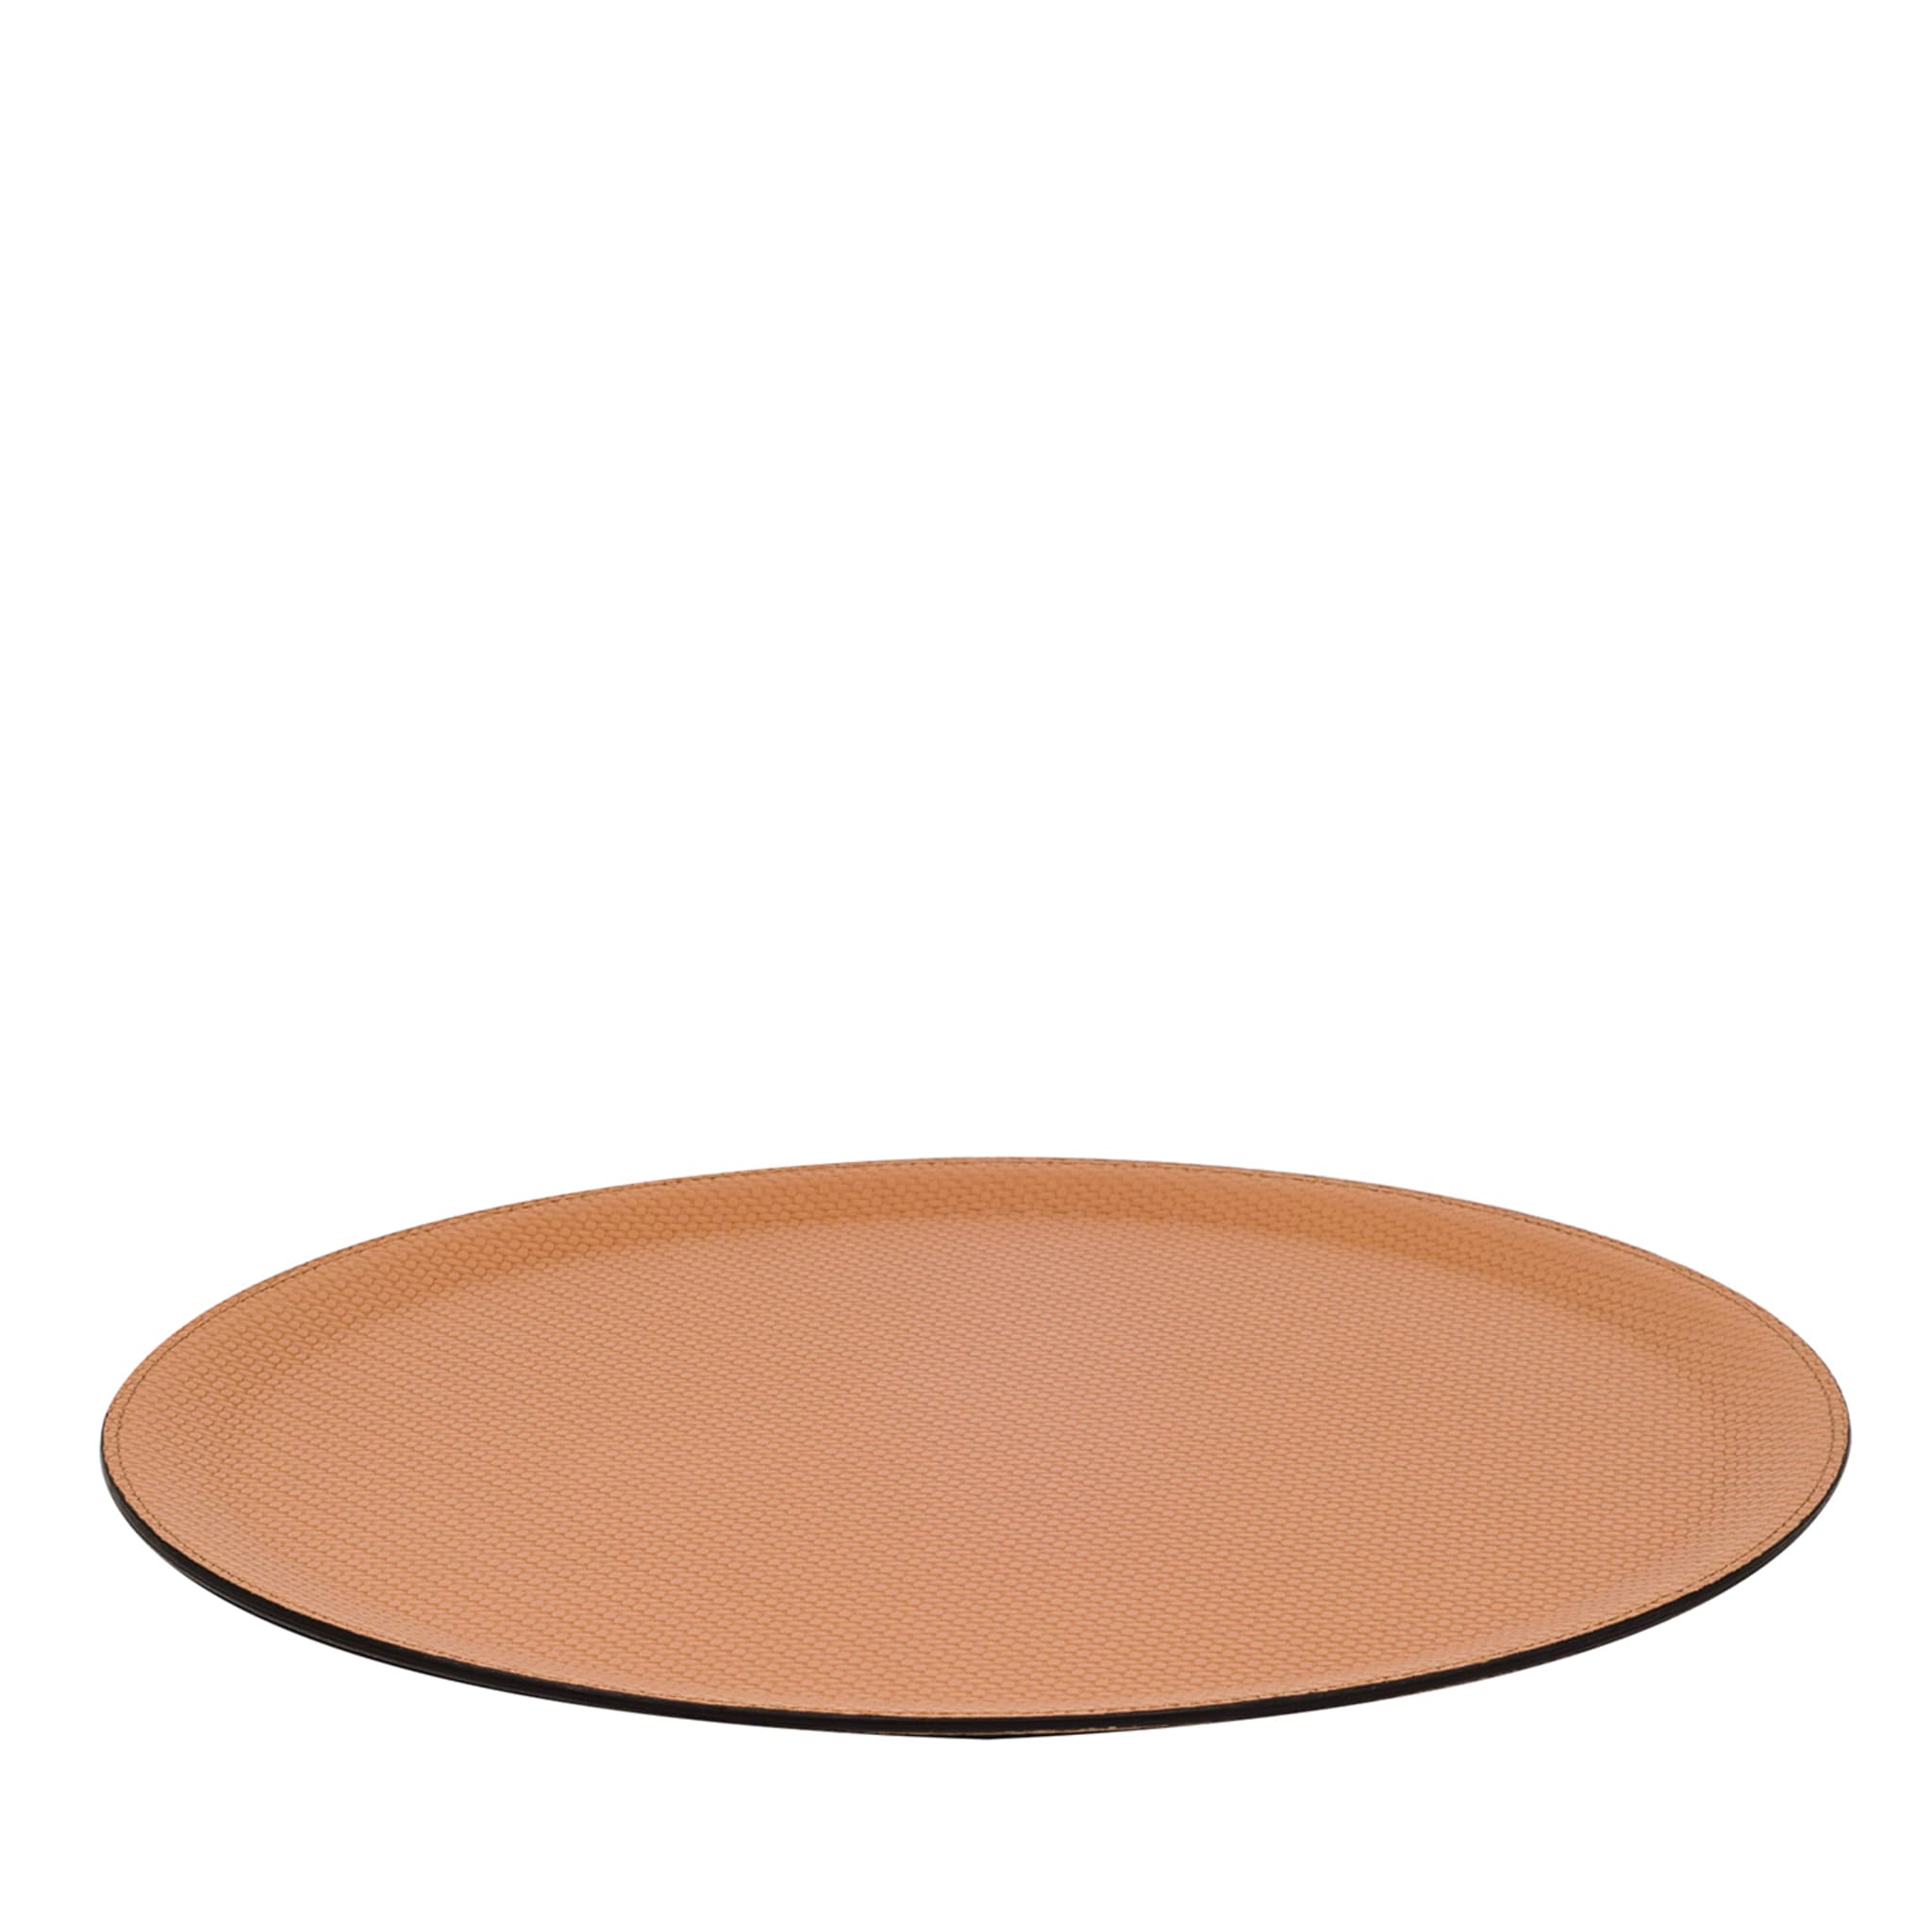 Circular Brown Leather Tray - Main view